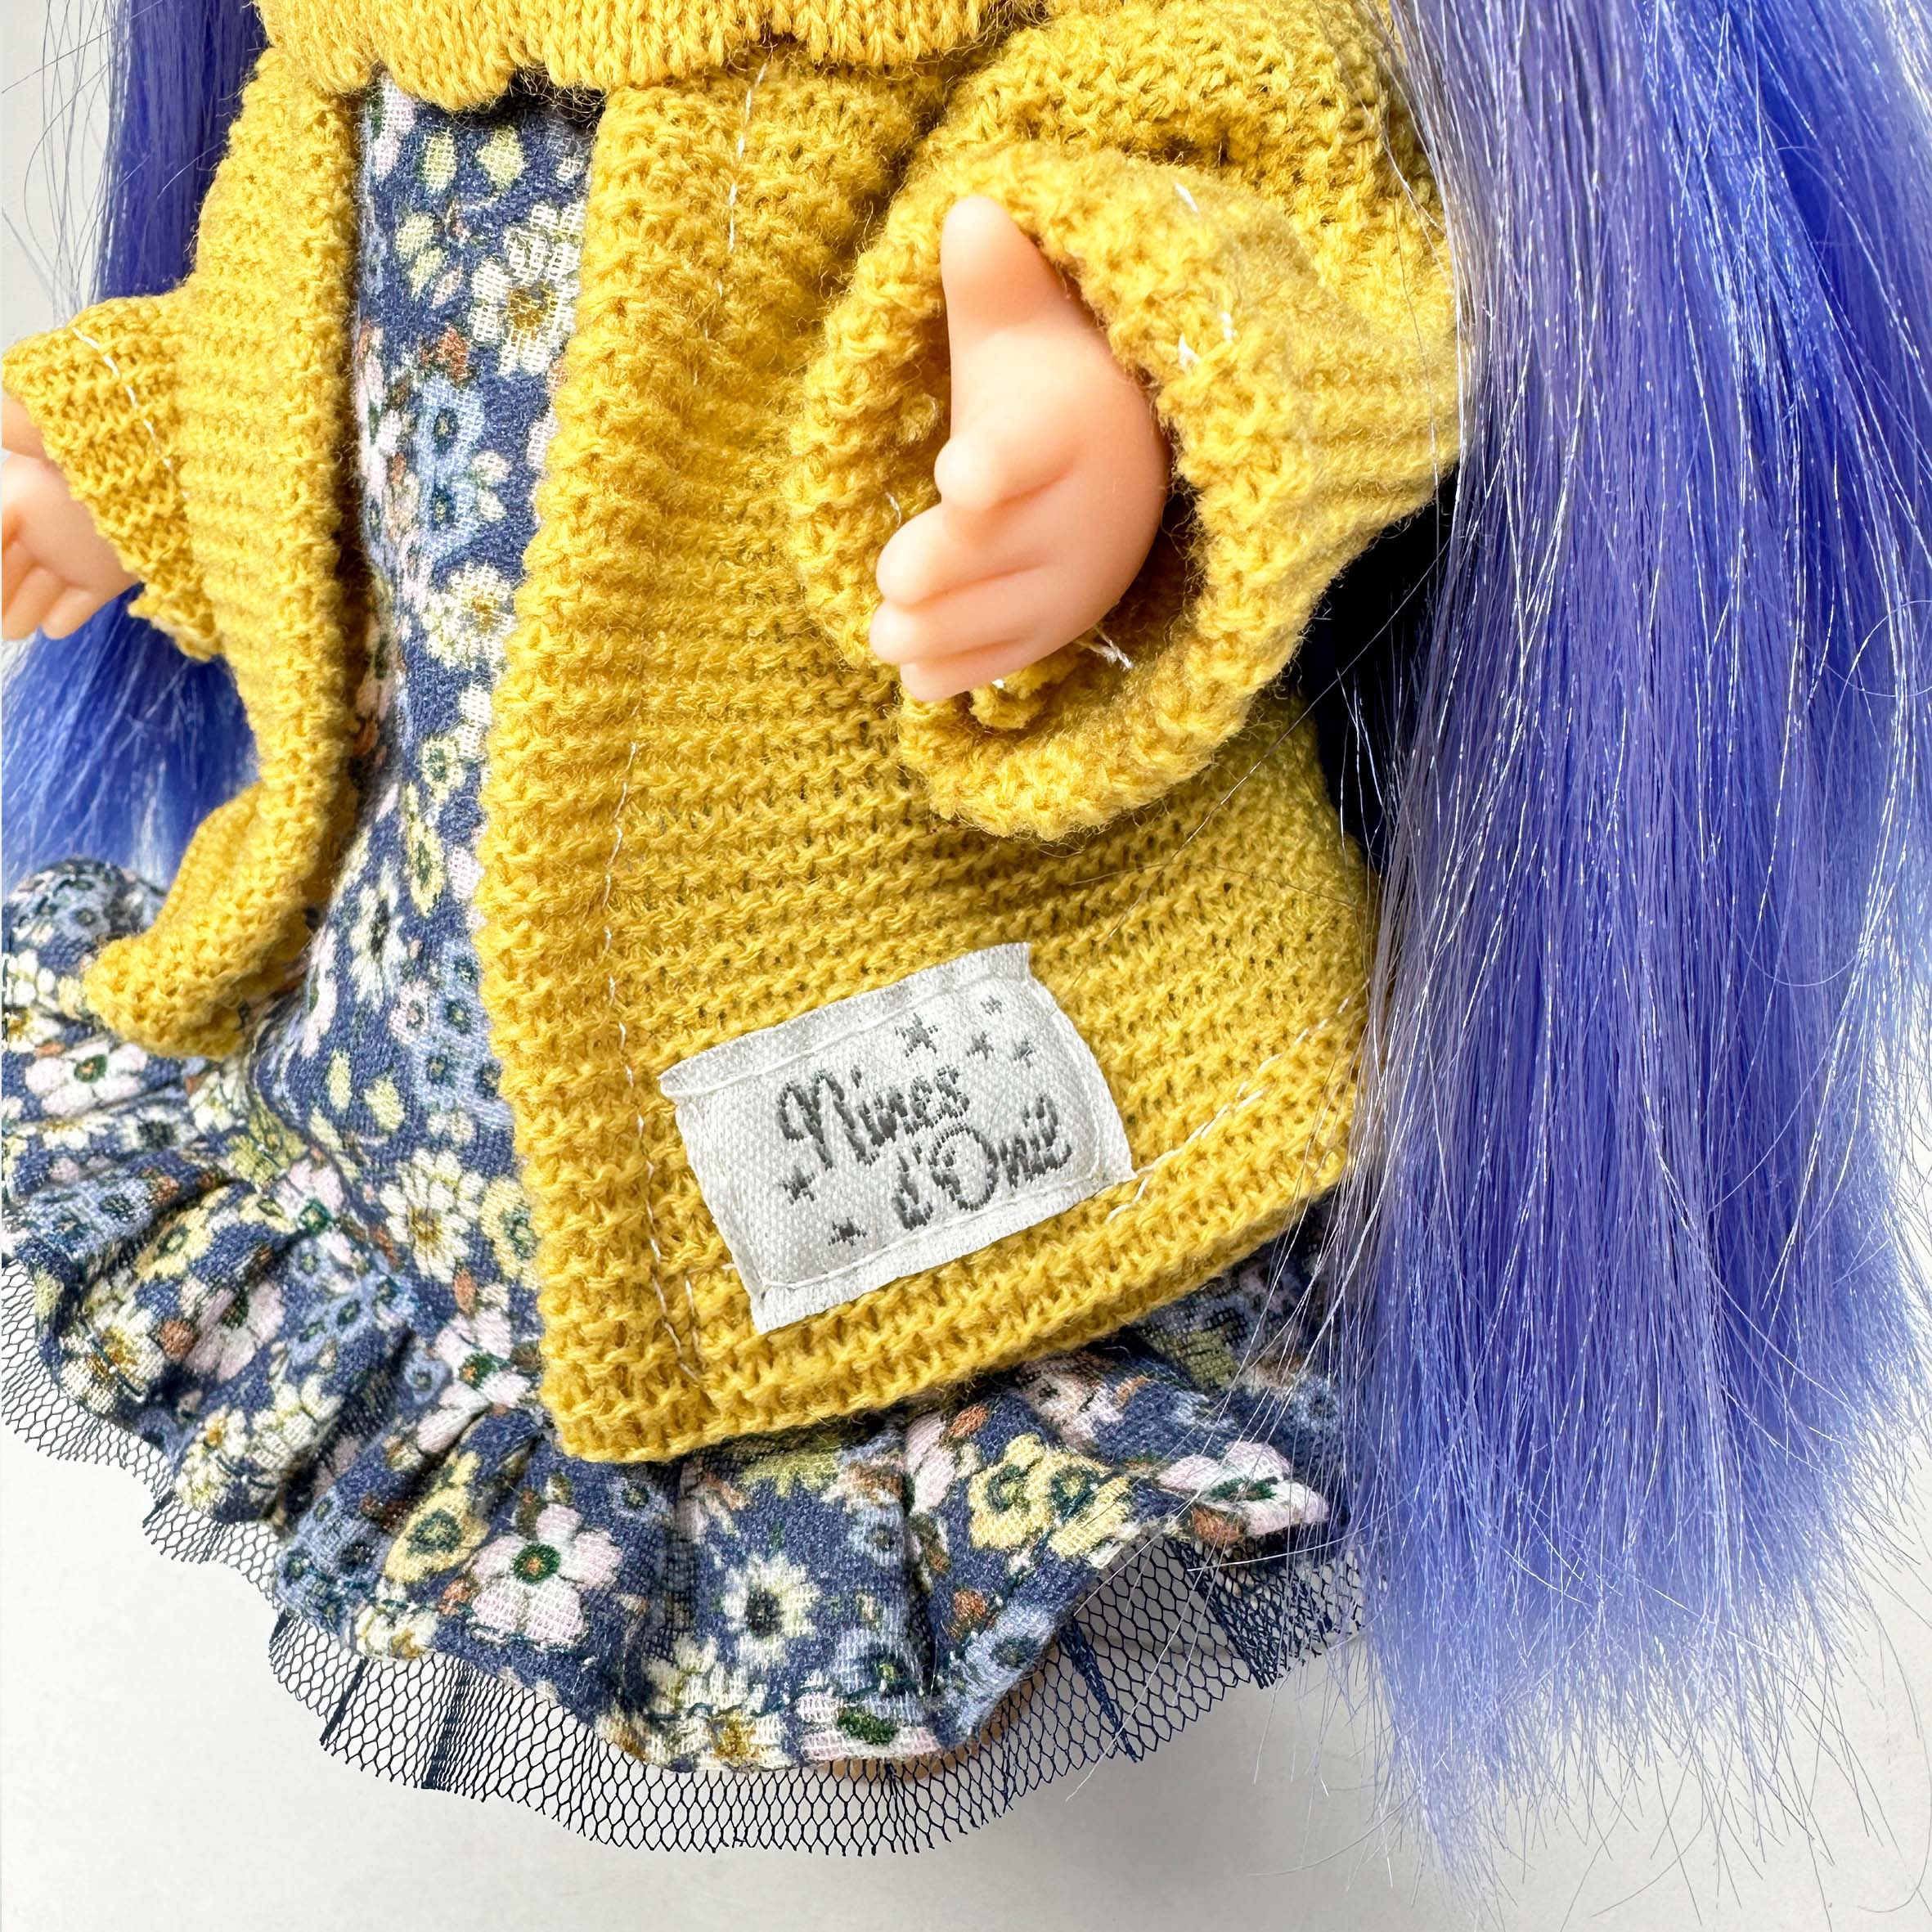 Handcrafted Collectible Mia Blue Suede Doll (3406) by Nines D&